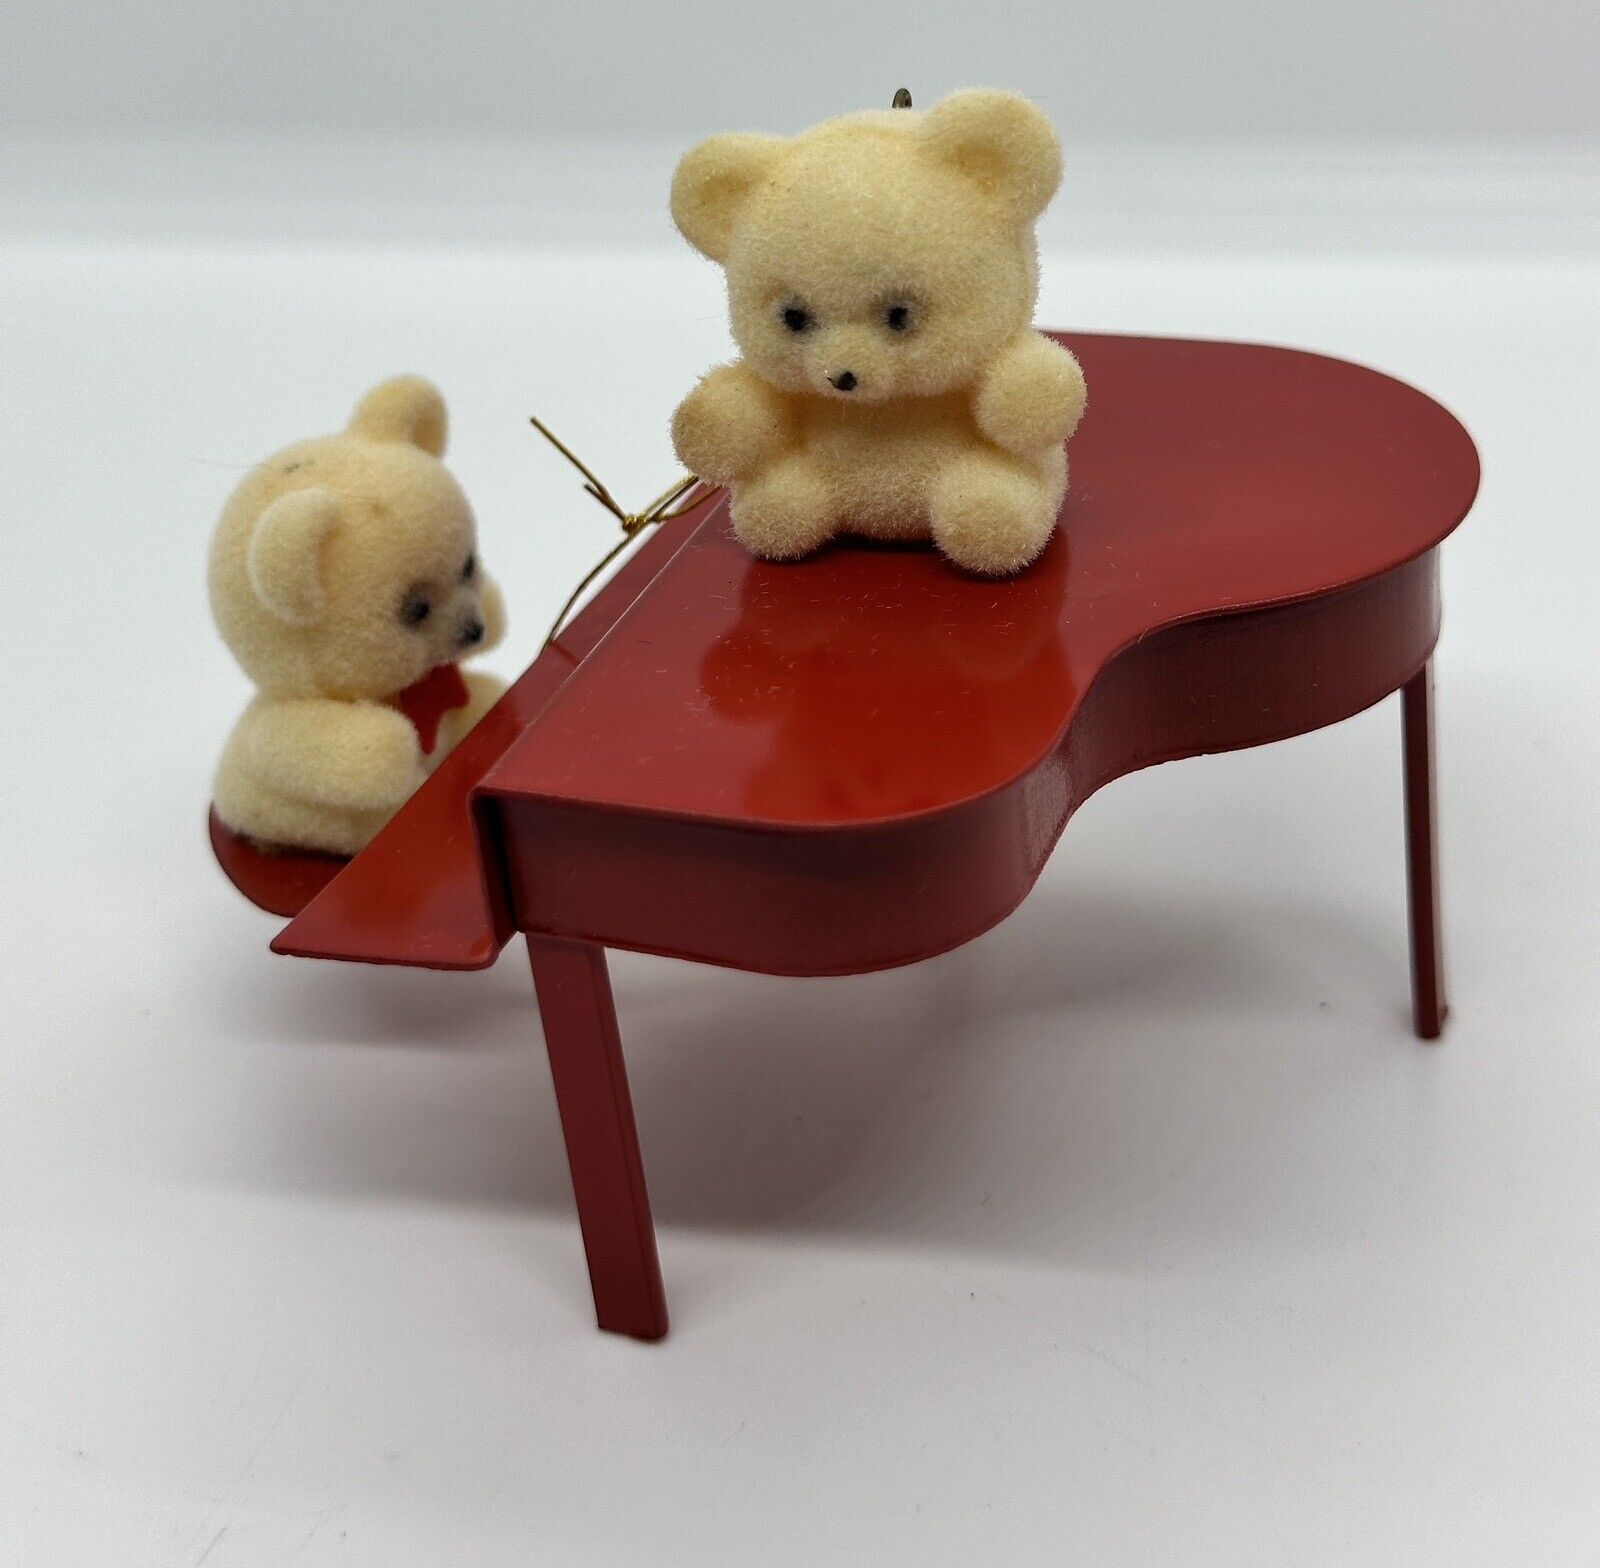 Avon Teddy Bear Gift Collection Ornaments Teddies on Piano Red Metal Piano